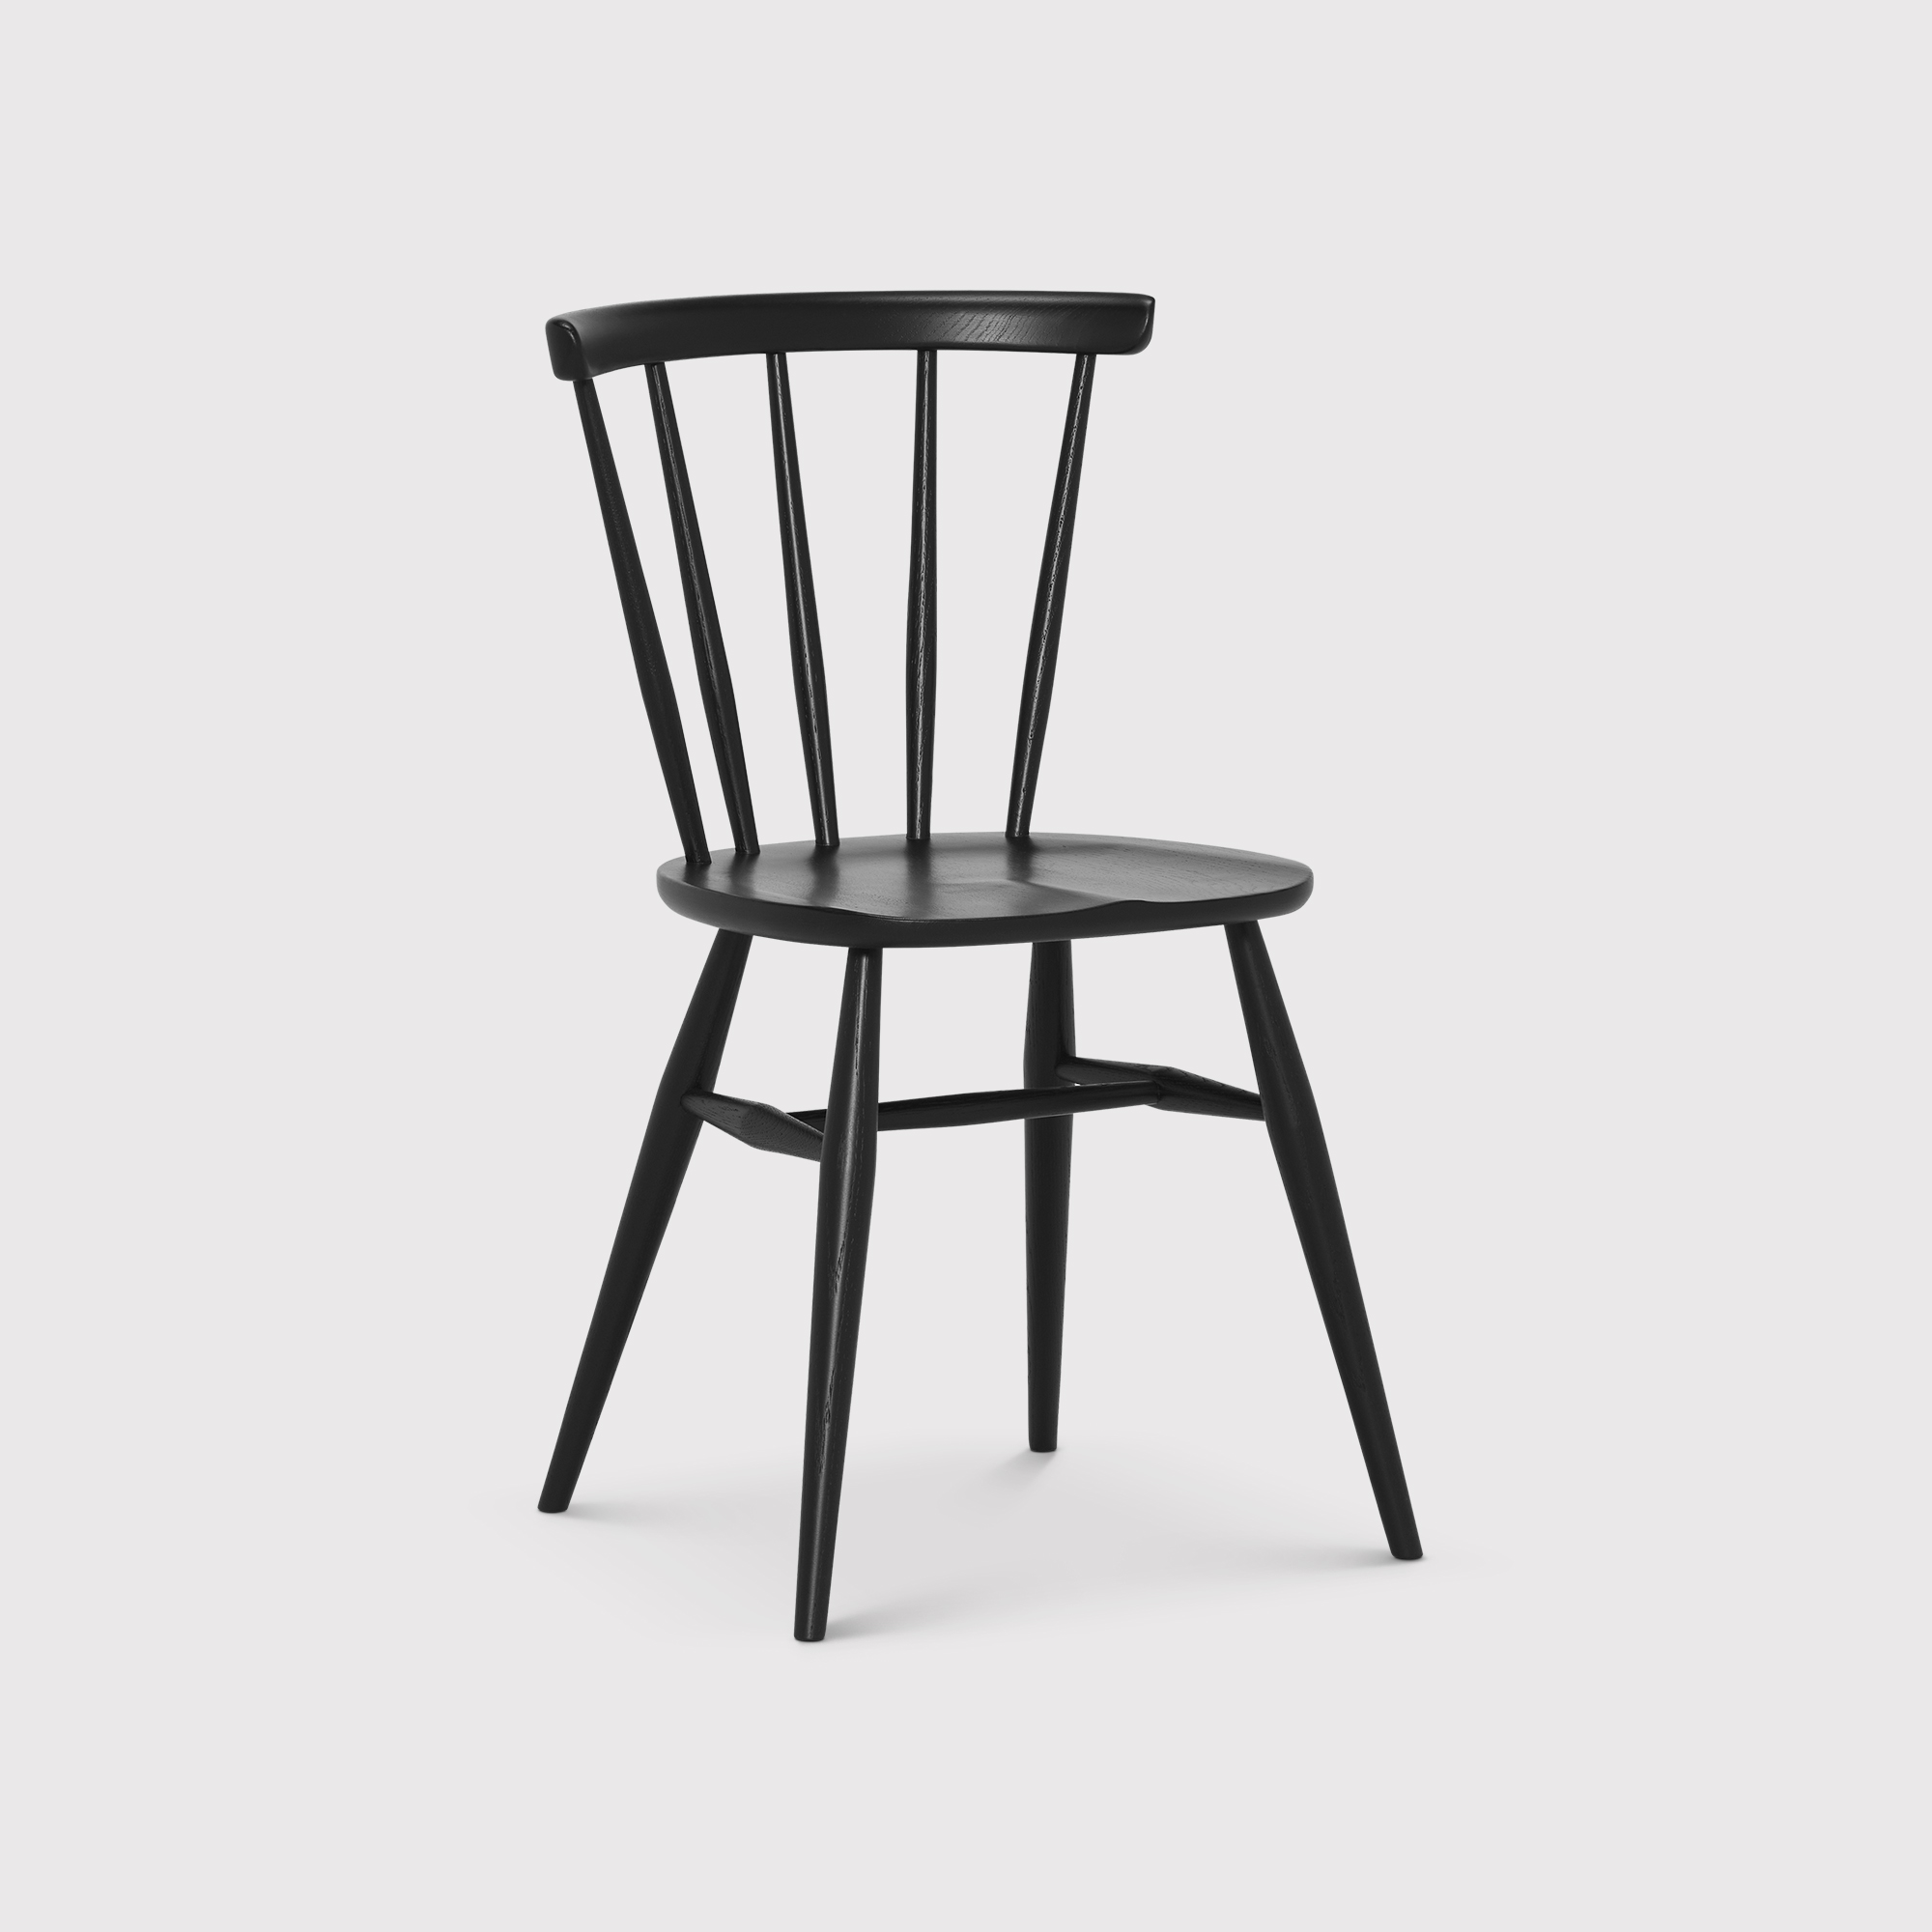 Ercol Heritage Dining Chair, Black | Barker & Stonehouse